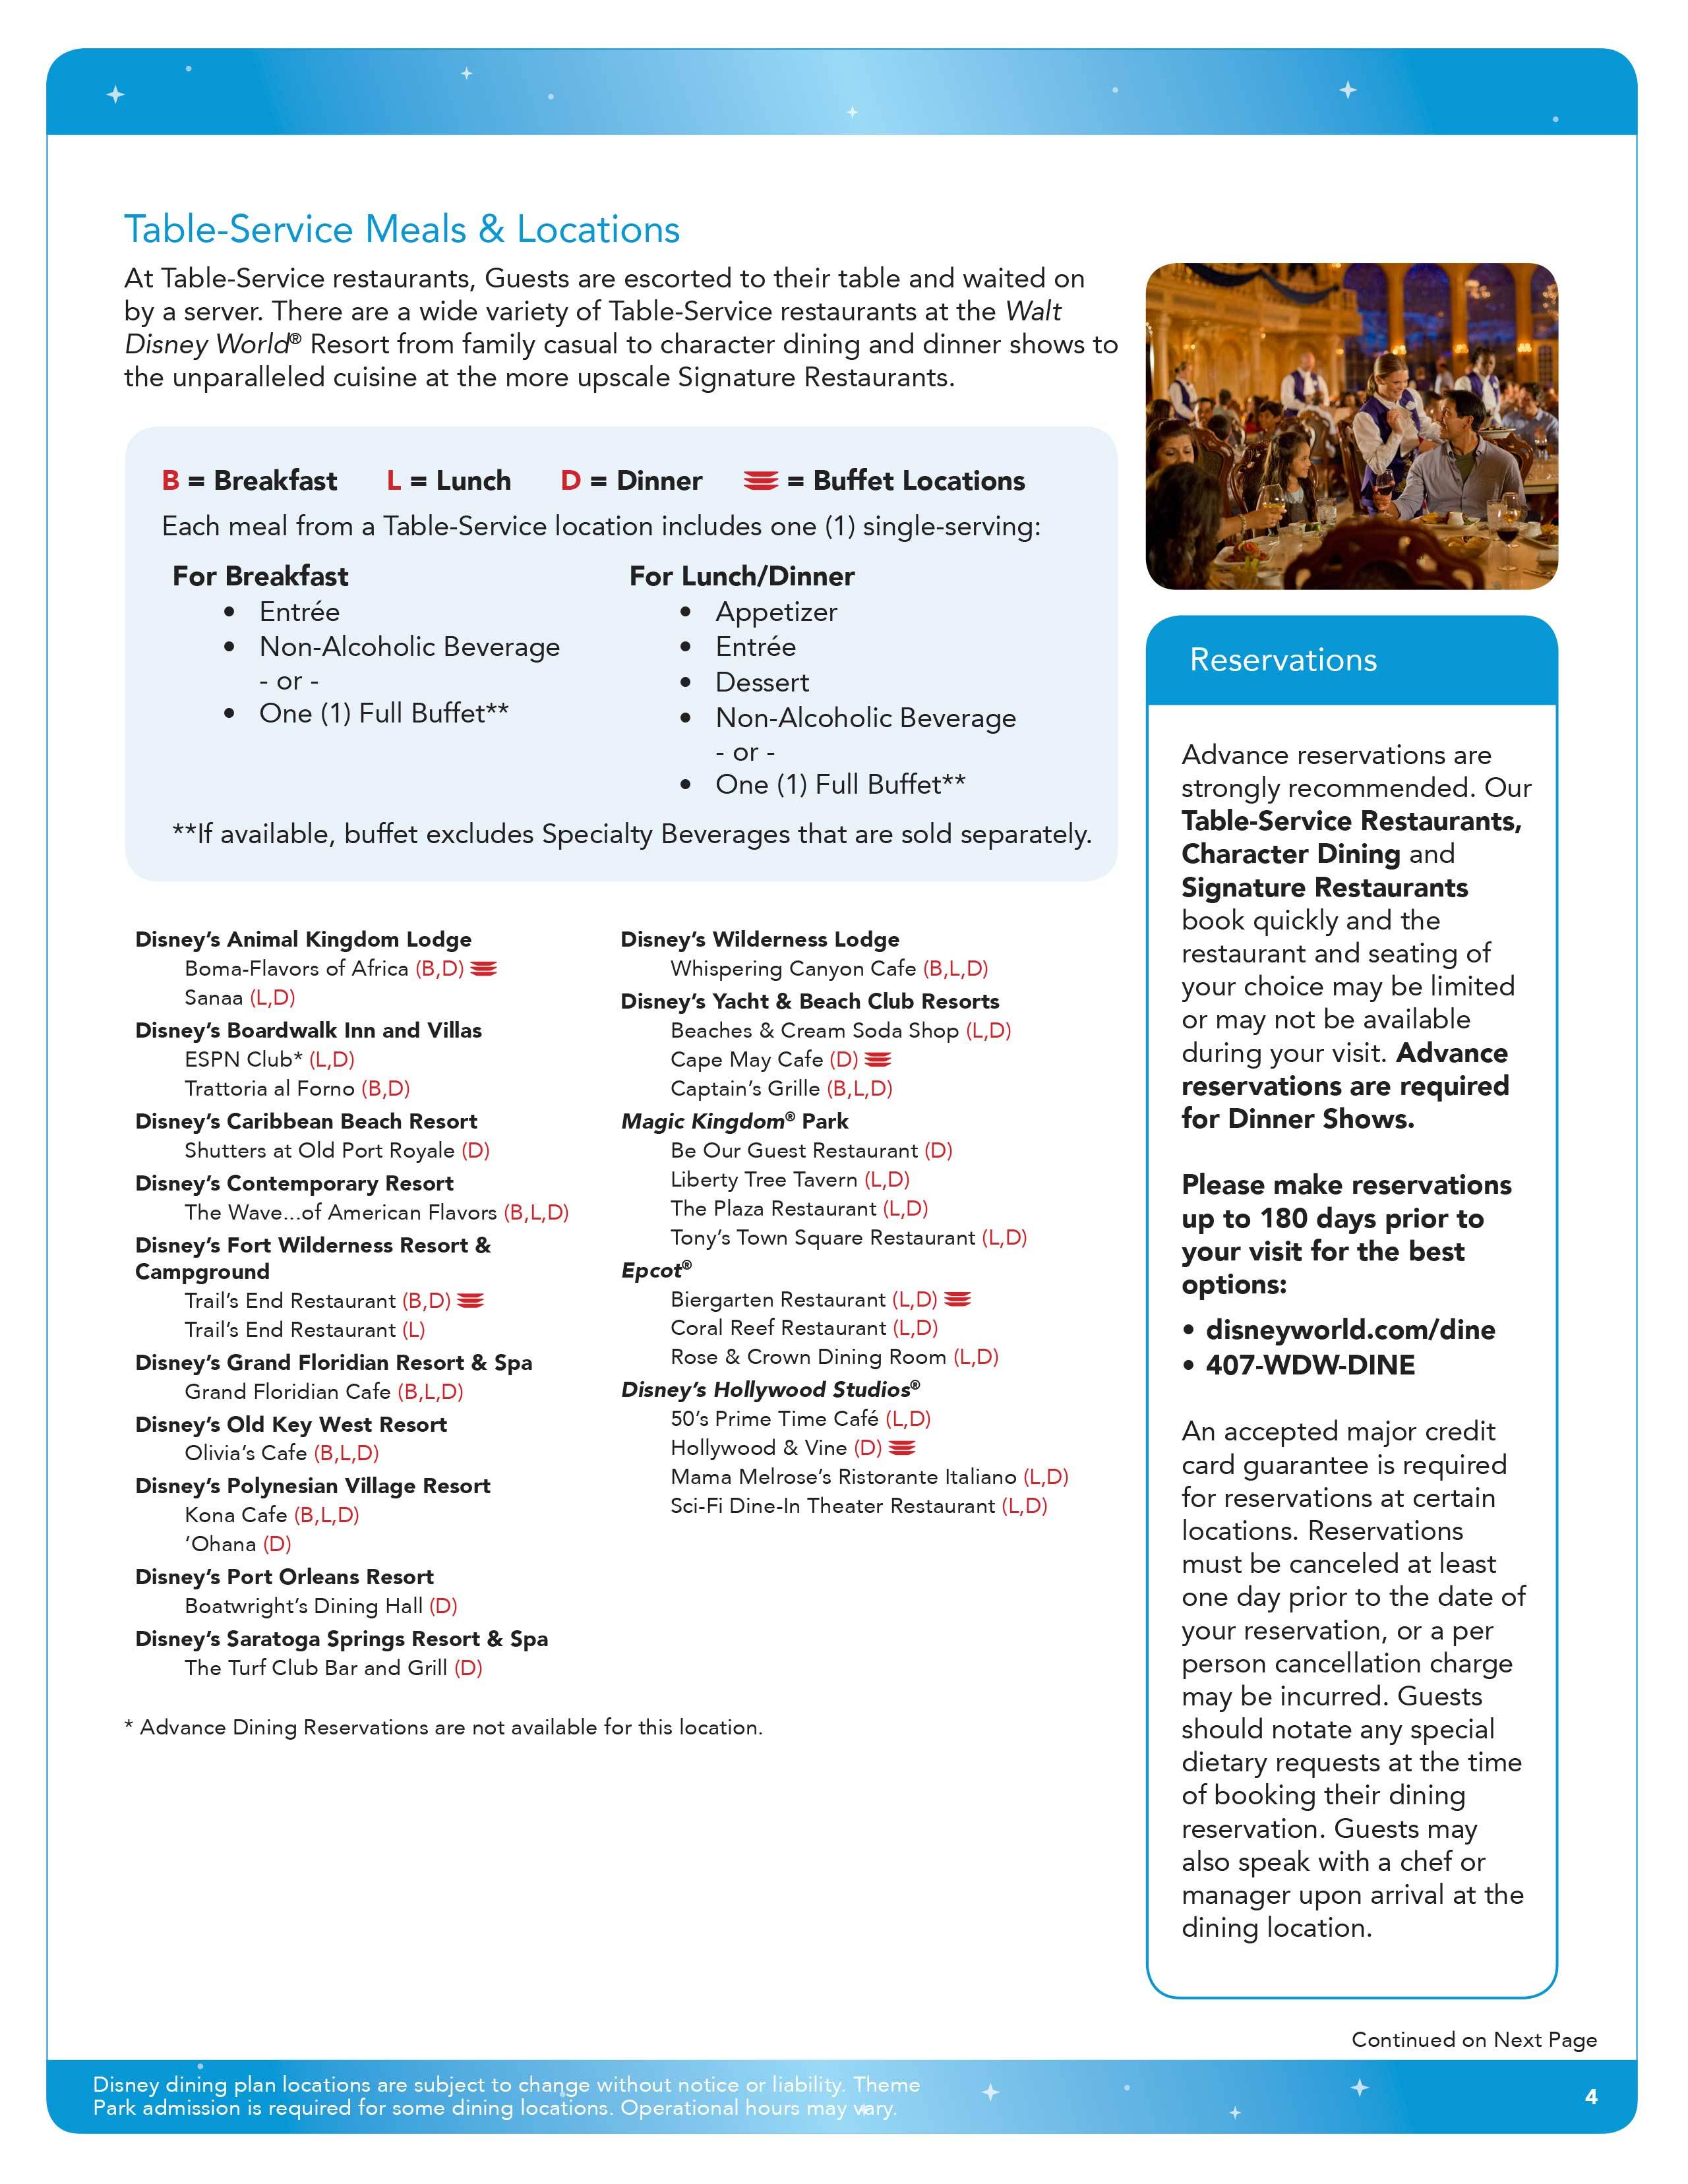 2016 Disney Dining Plan brochures updated to include appetizers for Deluxe plan